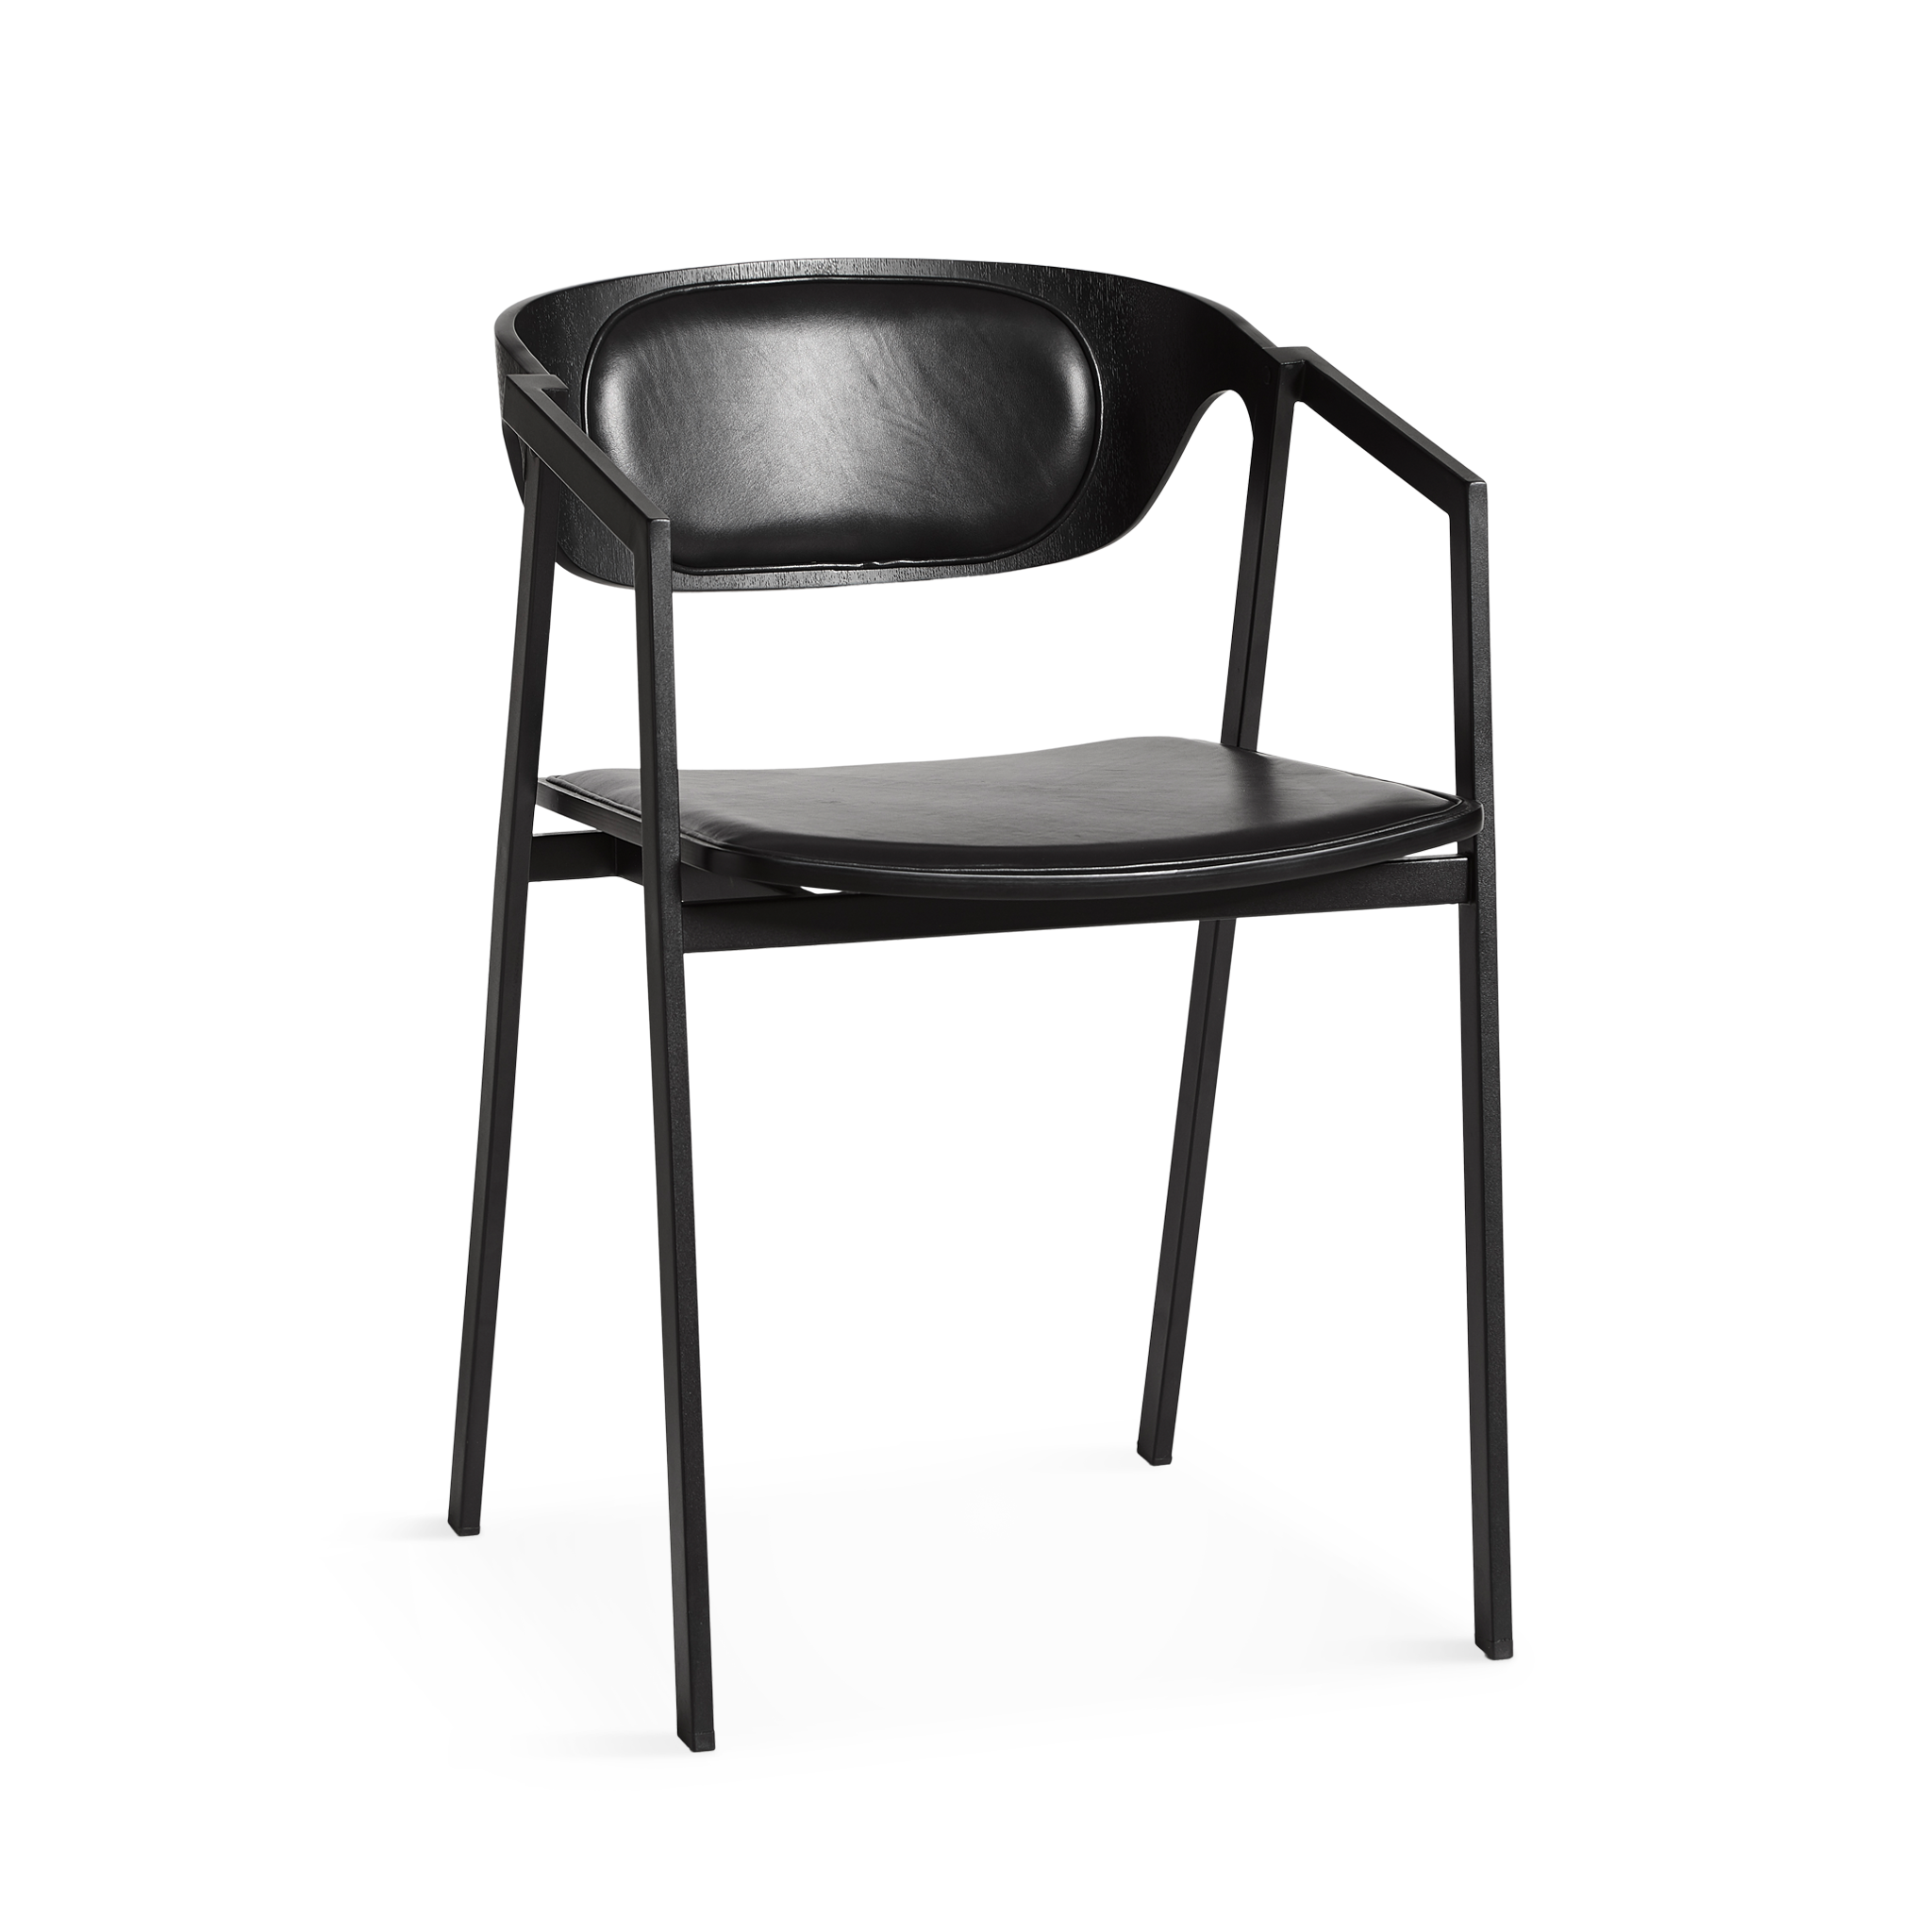 WOUD -  S.A.C. dining chair w/black leather